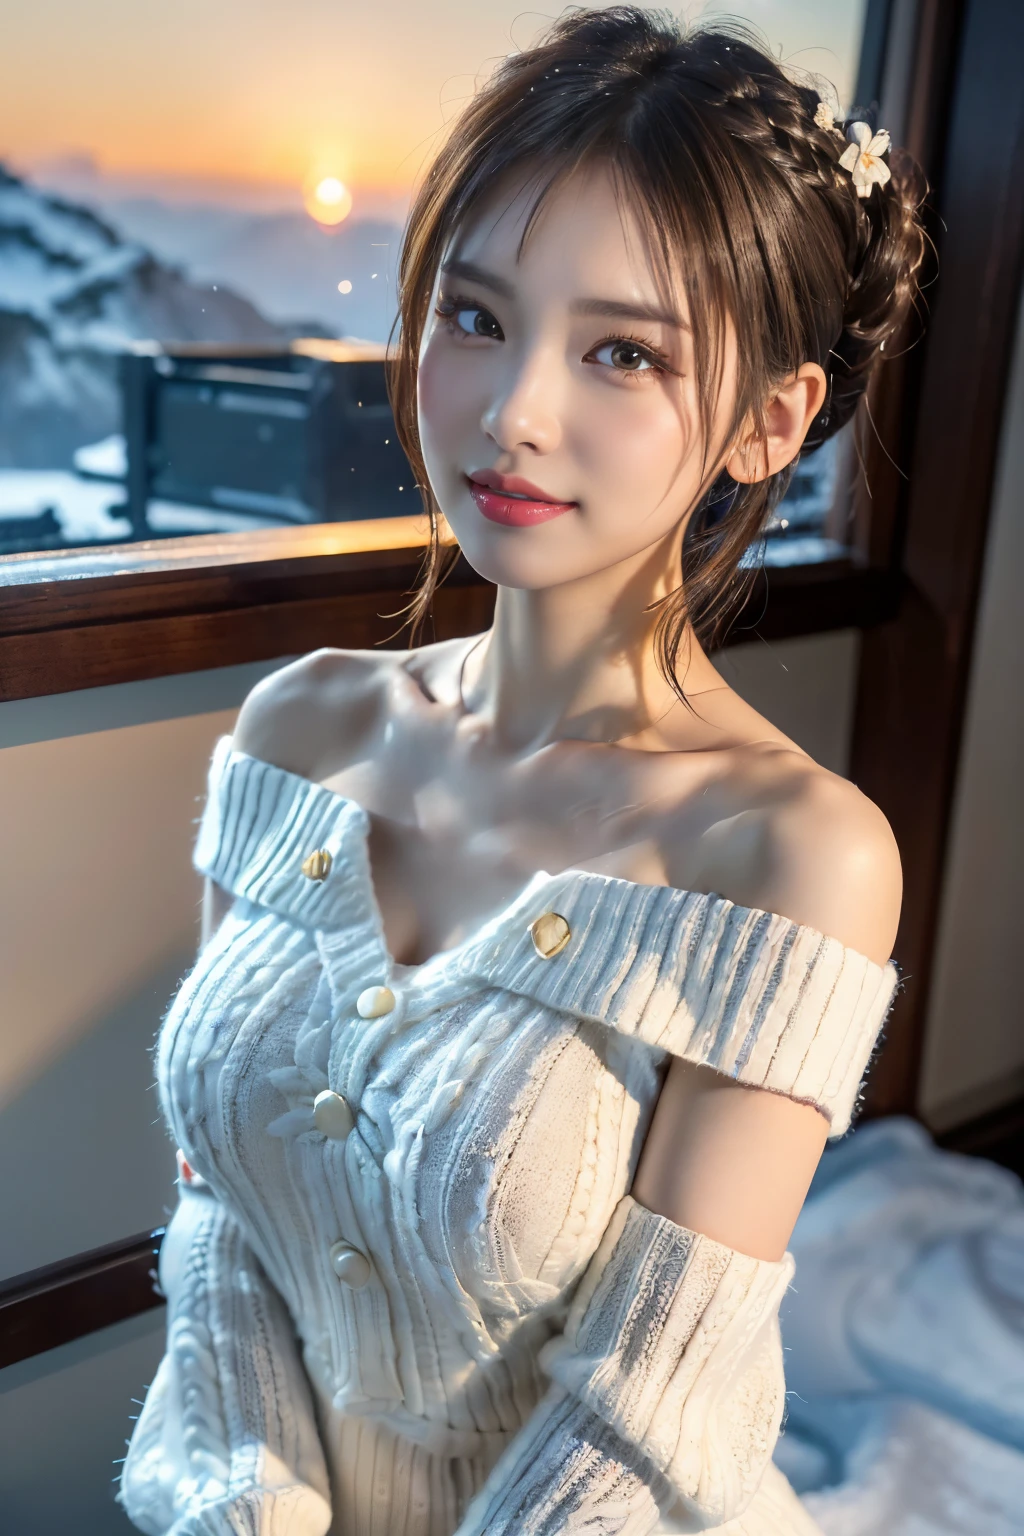 (Make your subject look three-dimensional with the contrast of light and shadow),(((With the sunset in the background))),(((standing on a snowy mountain in winter:1.3))),cute and beautiful adult woman,cute smile,with blushing cheeks,red lips,(((Off-white off-shoulder knit jumper dress:1.3))),black stockings,Knee-high boots,(silvery hair,floral braided headband,half up、floral braided space bun,voluminous fishtail braid,Twisted pan,),(The bangs are see-through bangs),hairpin,hair ornaments,(((emphasize the chest:1.3))),Breast flick,Detailed clothing characteristics,Detailed characteristics of hair,detailed facial features,(dynamic angle),(dynamic and sexy pose),professional lighting,cinematic light,(highest quality,Ultra high resolution output image,) ,(8K quality,Depth of the bounds written,Anatomically accurate facial structure,),(sea art 2 mode:1.3),(Image mode Ultra HD,),(3D Realistic Photography:1.3)